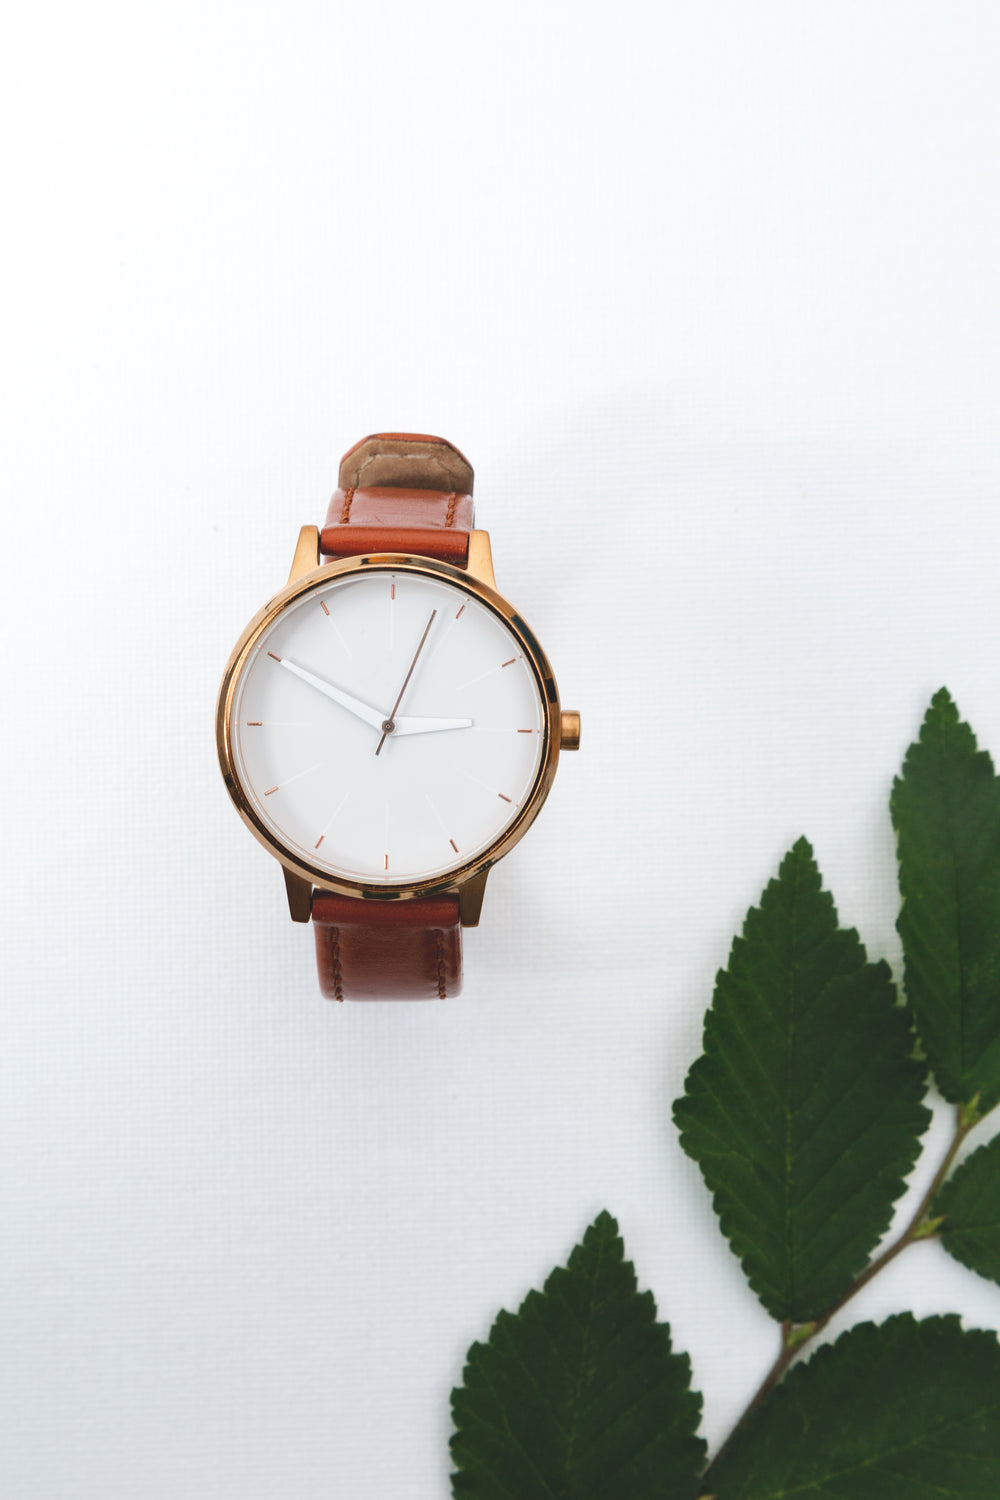 watch with leather strap near leaves